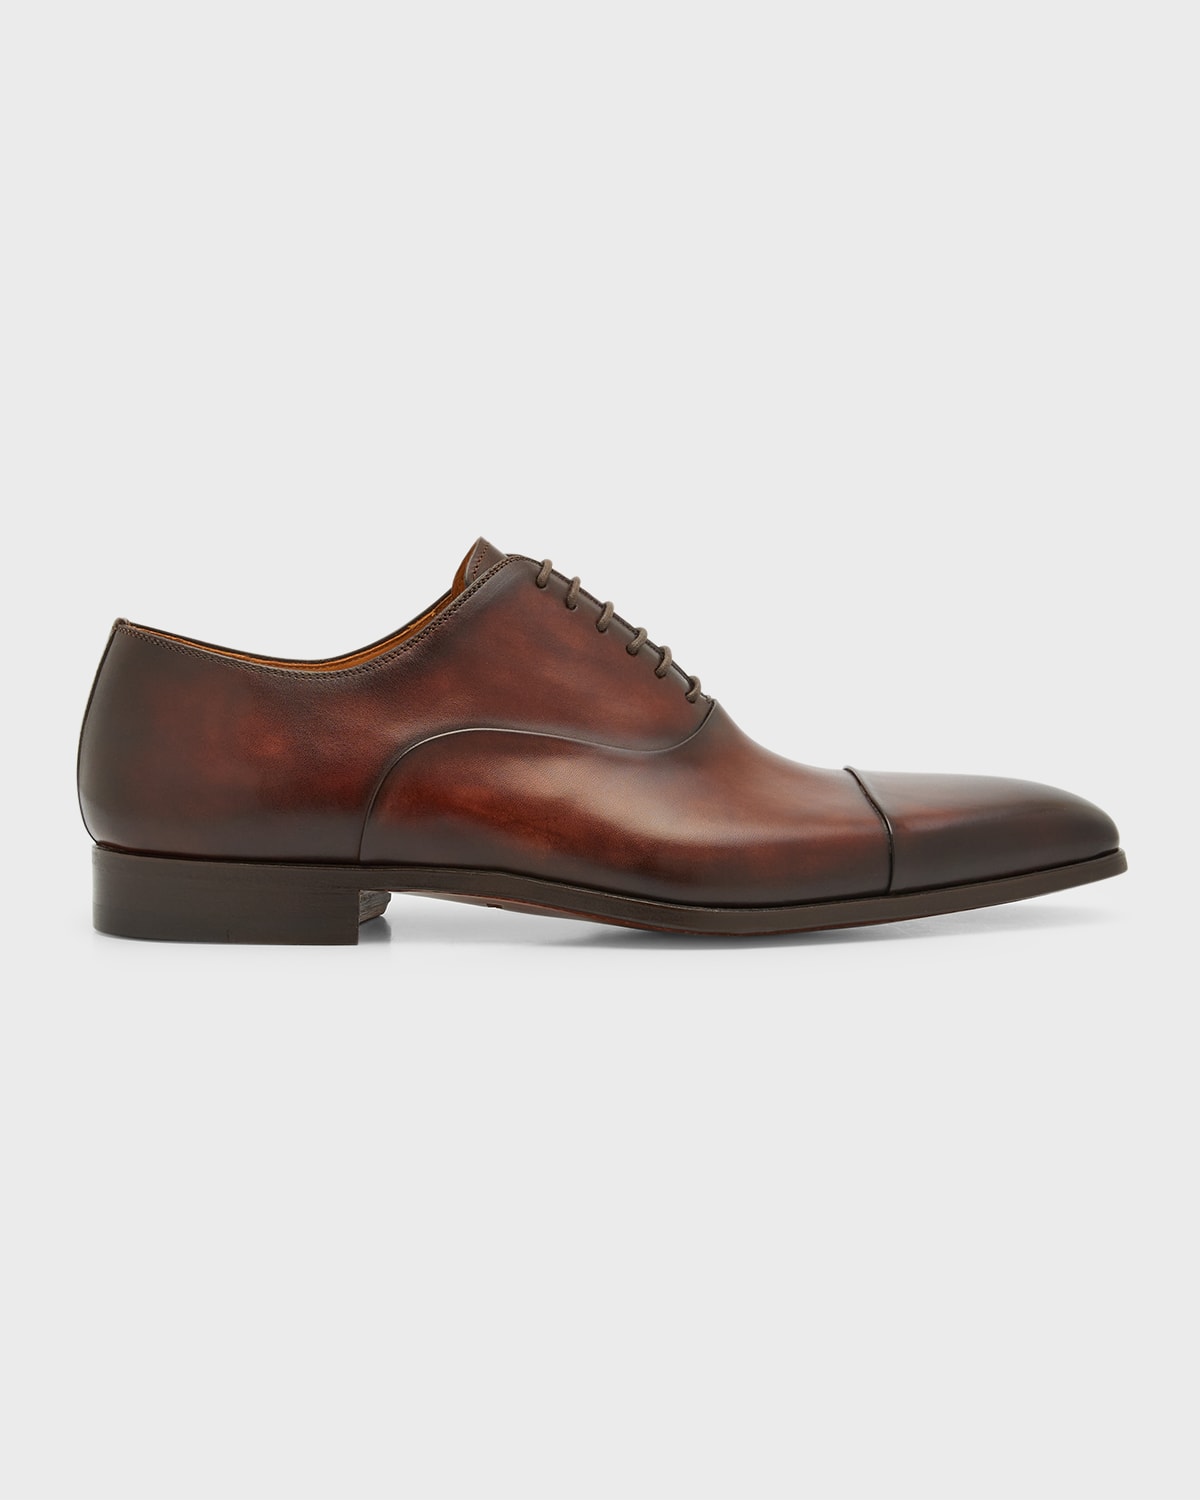 Zegna Torino leather oxford shoes - Brown